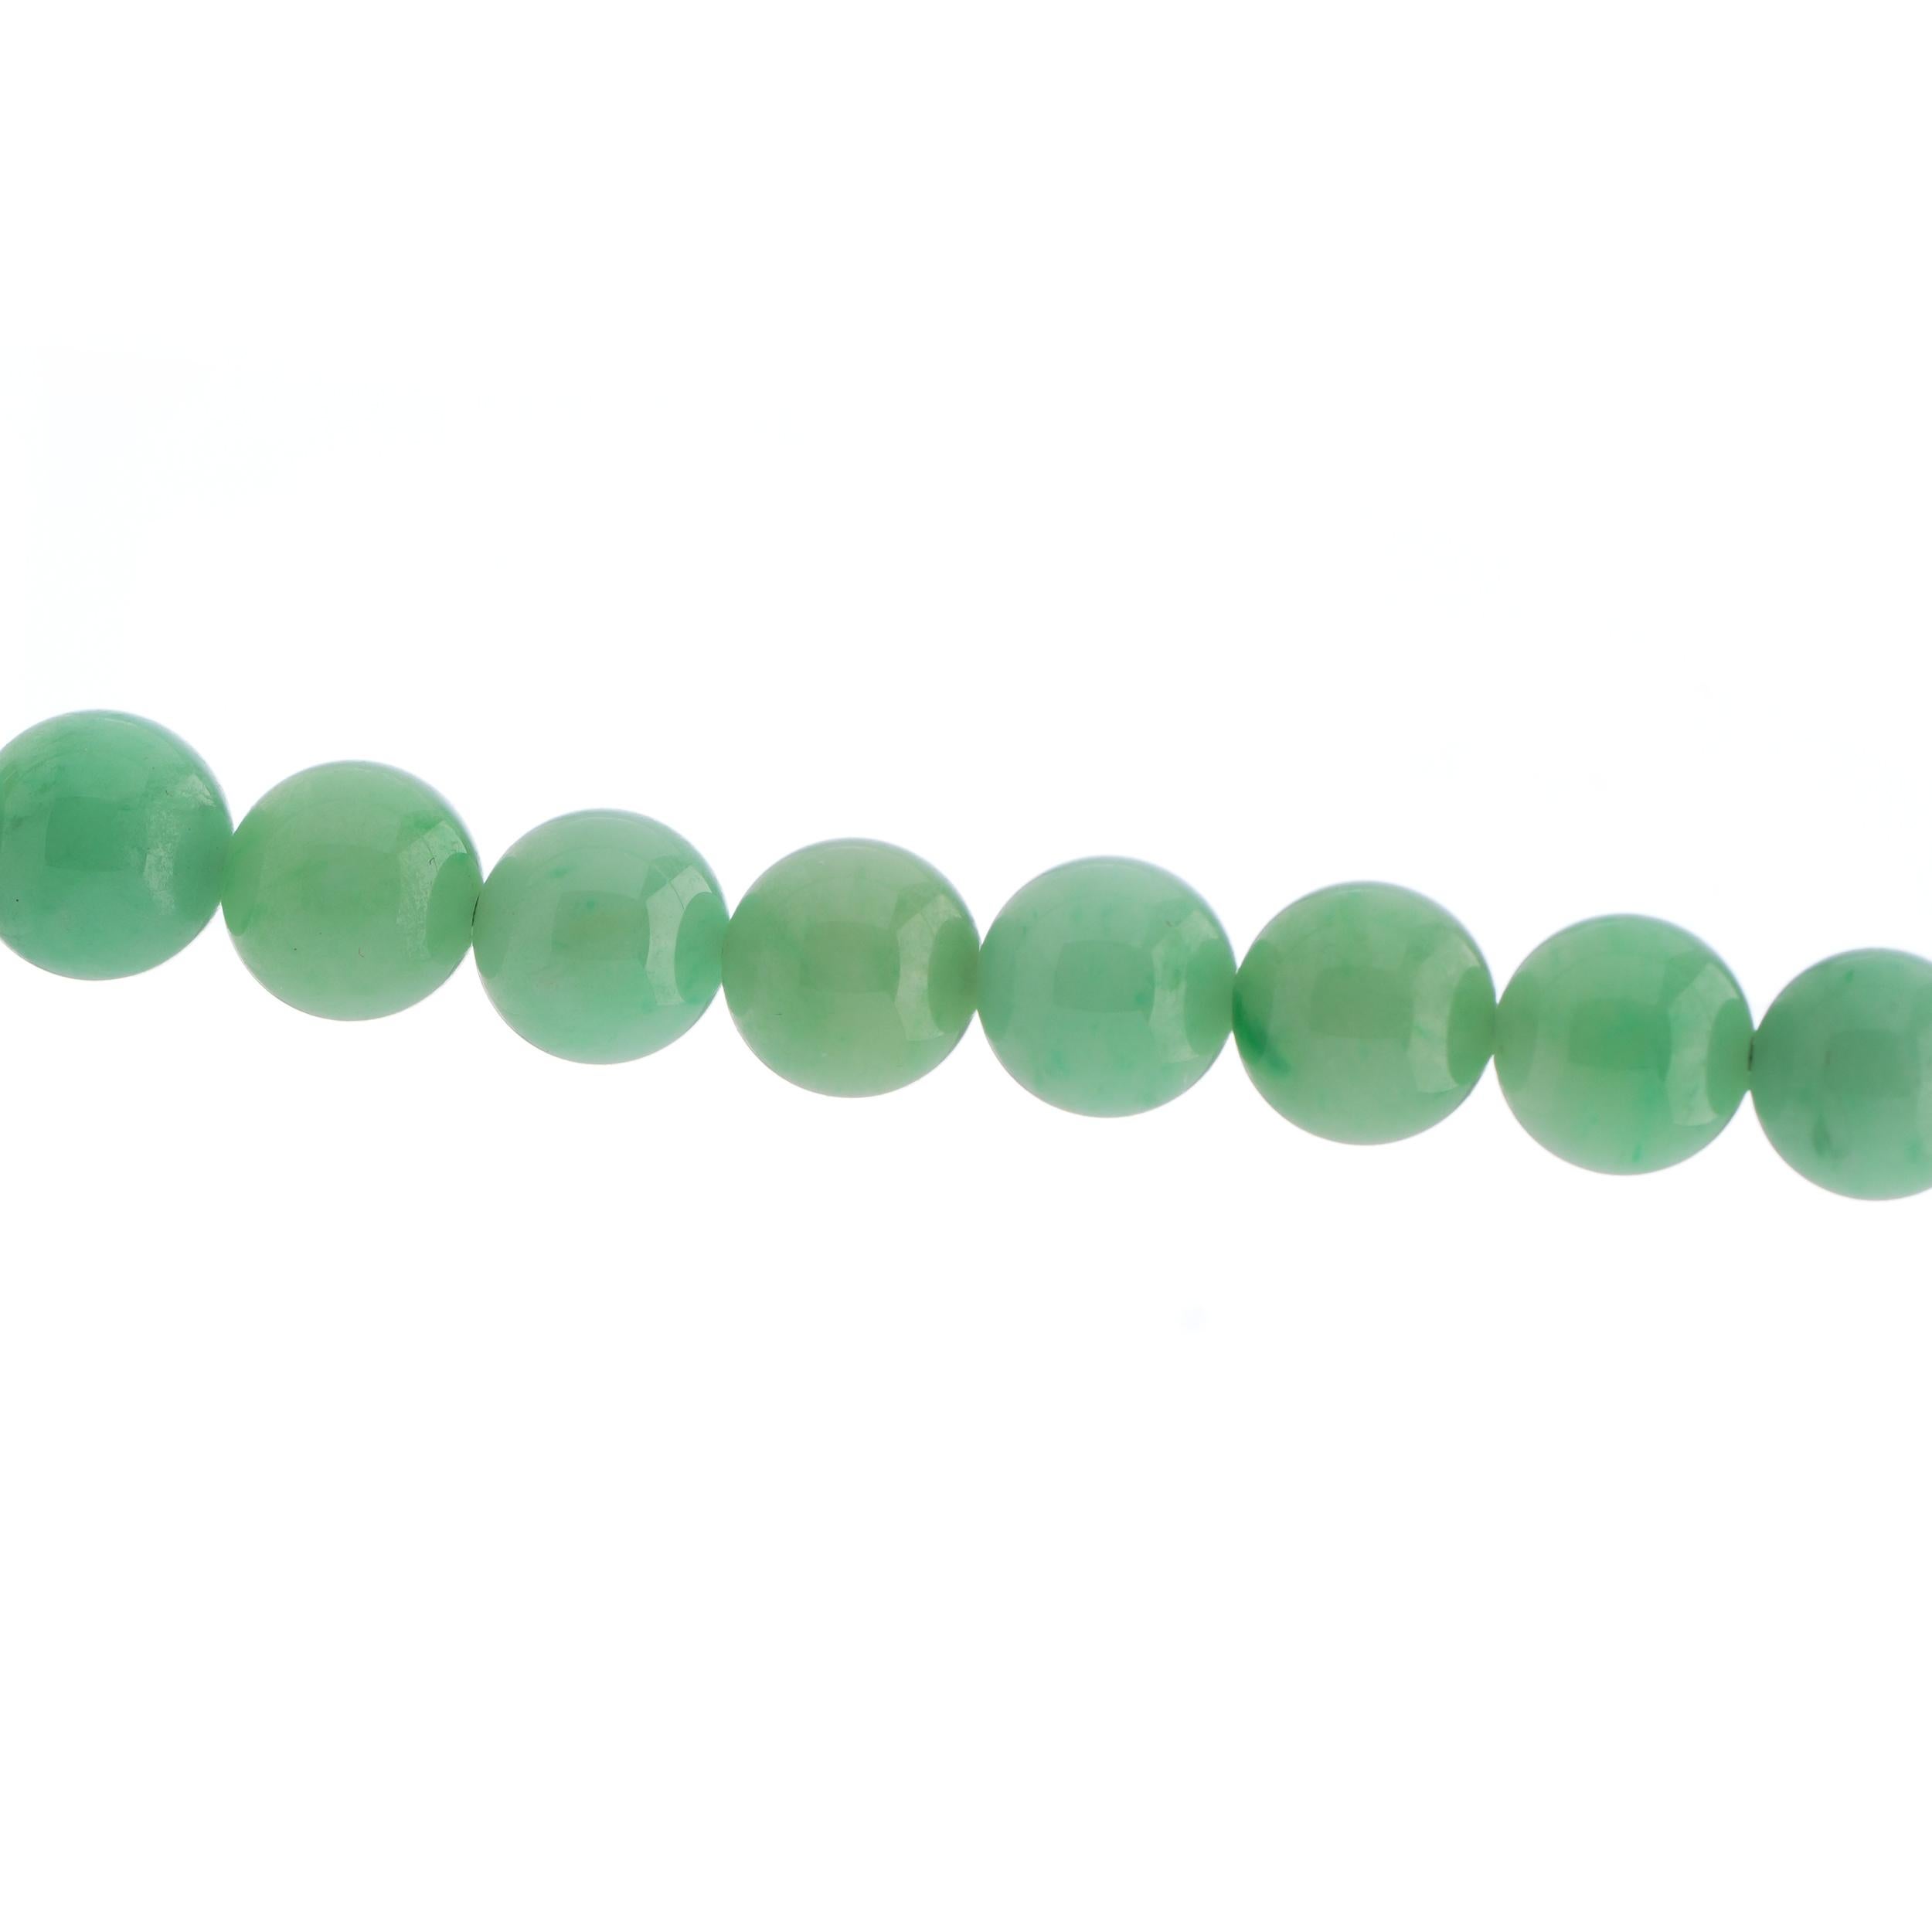 Antique Early 20th Century Natural Jade Bead Necklace with Platinum Clasp For Sale 1